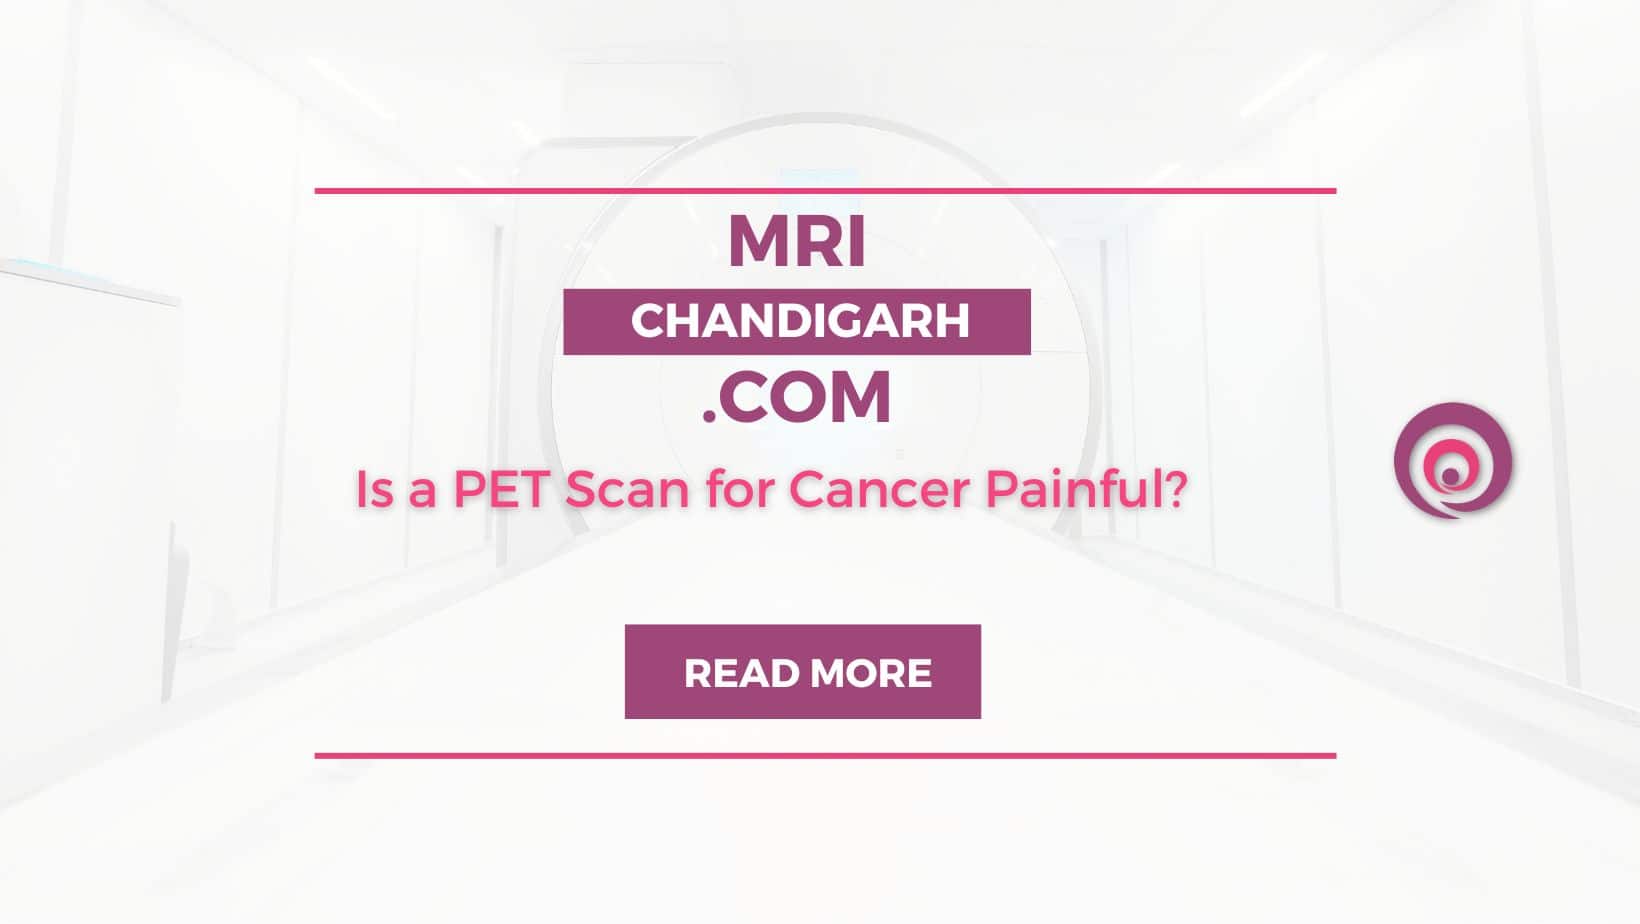 Is a PET Scan for Cancer Painful?